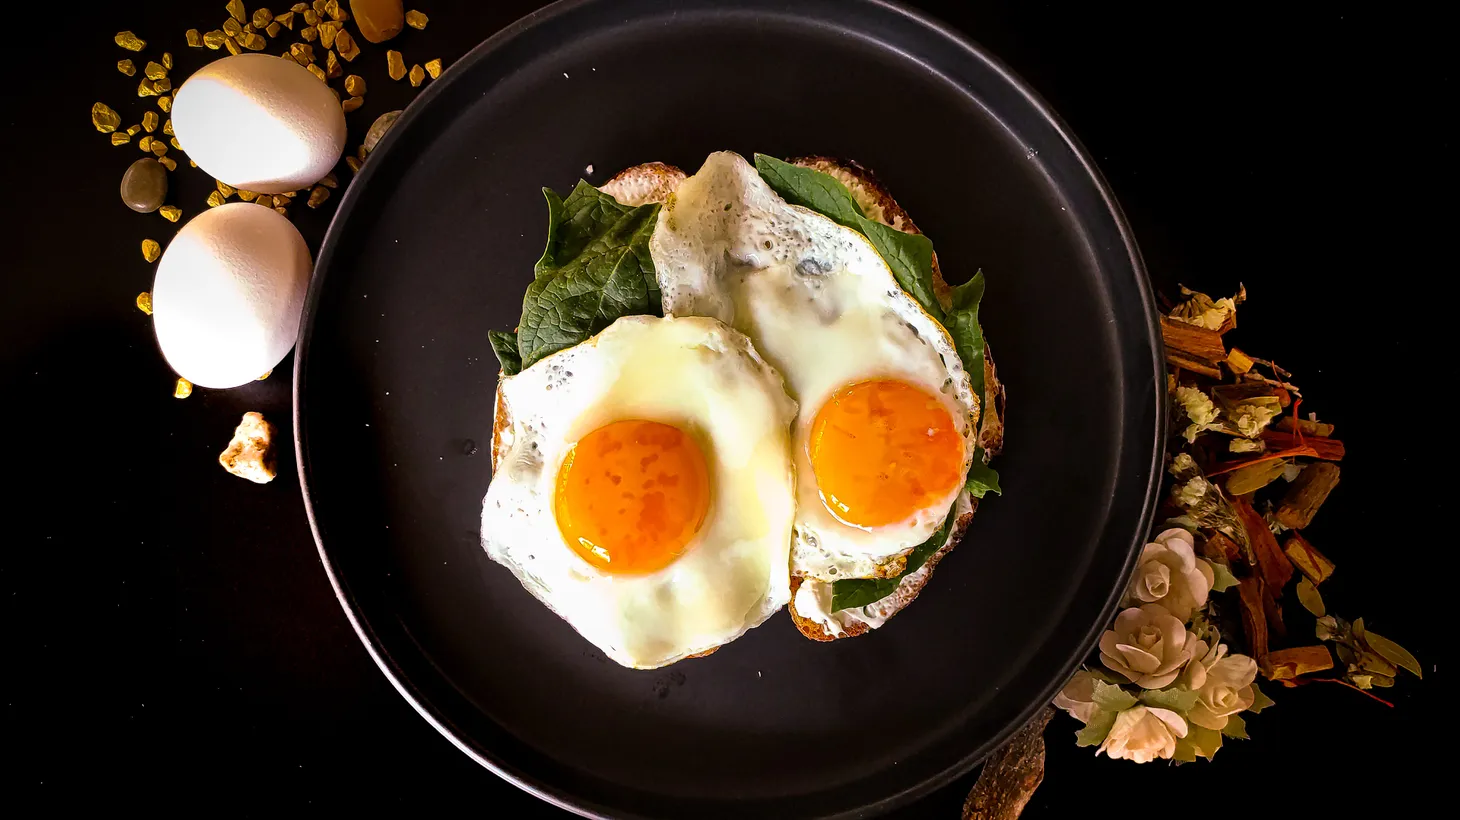 We love a fried egg for breakfast, but this versatile protein source goes well beyond that.